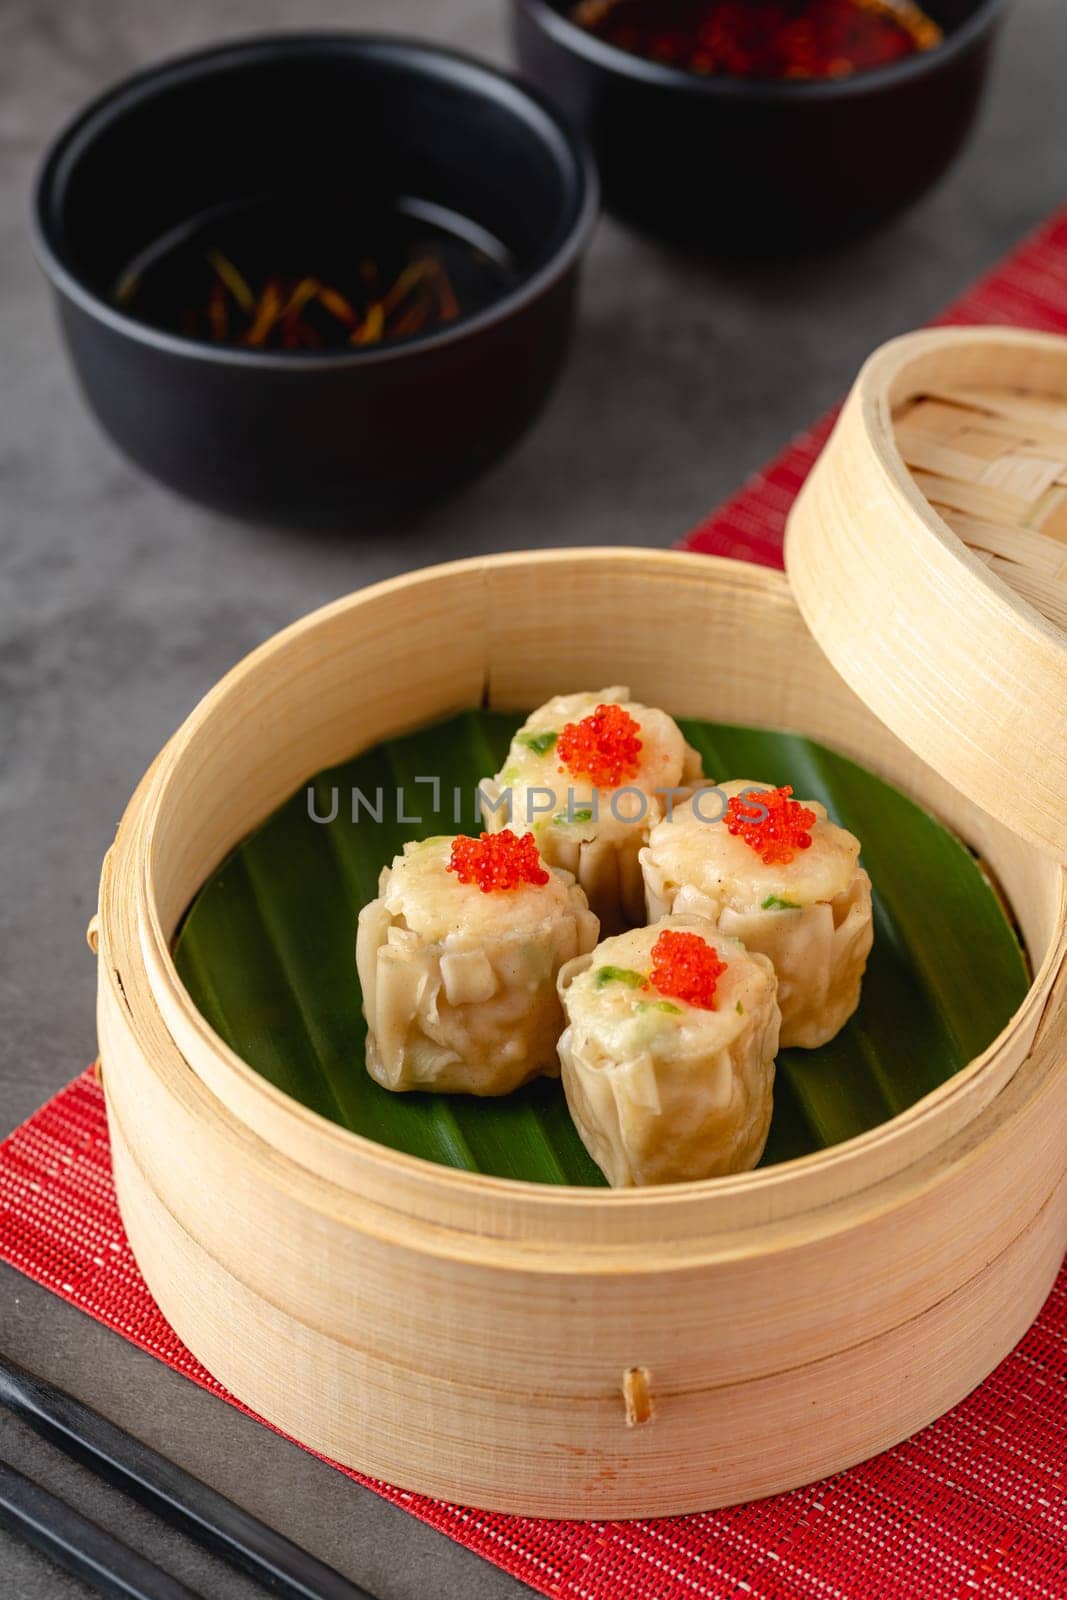 Shumai with shrimp and mushrooms, a traditional Chinese dumpling often served with dim sum by Sonat